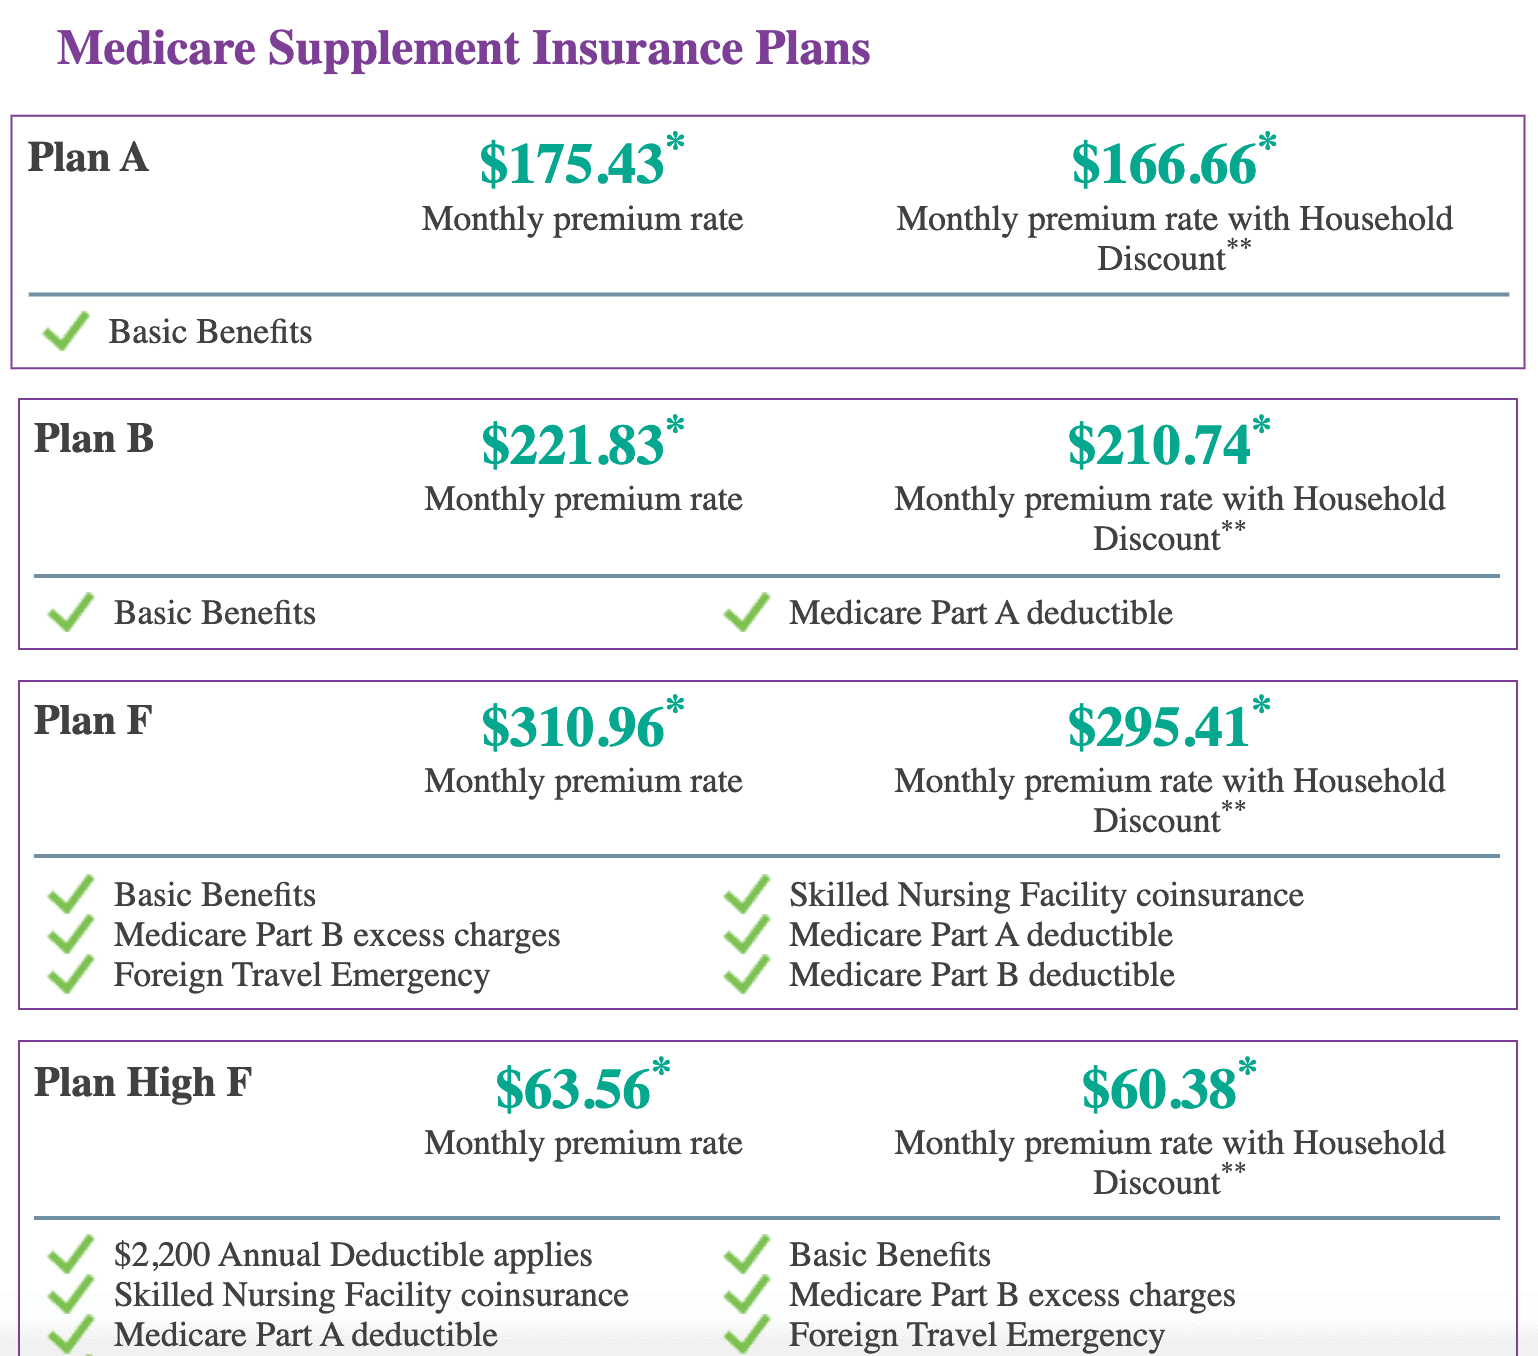 Aetna Medicare Supplement Plans Cost, Coverage & Review